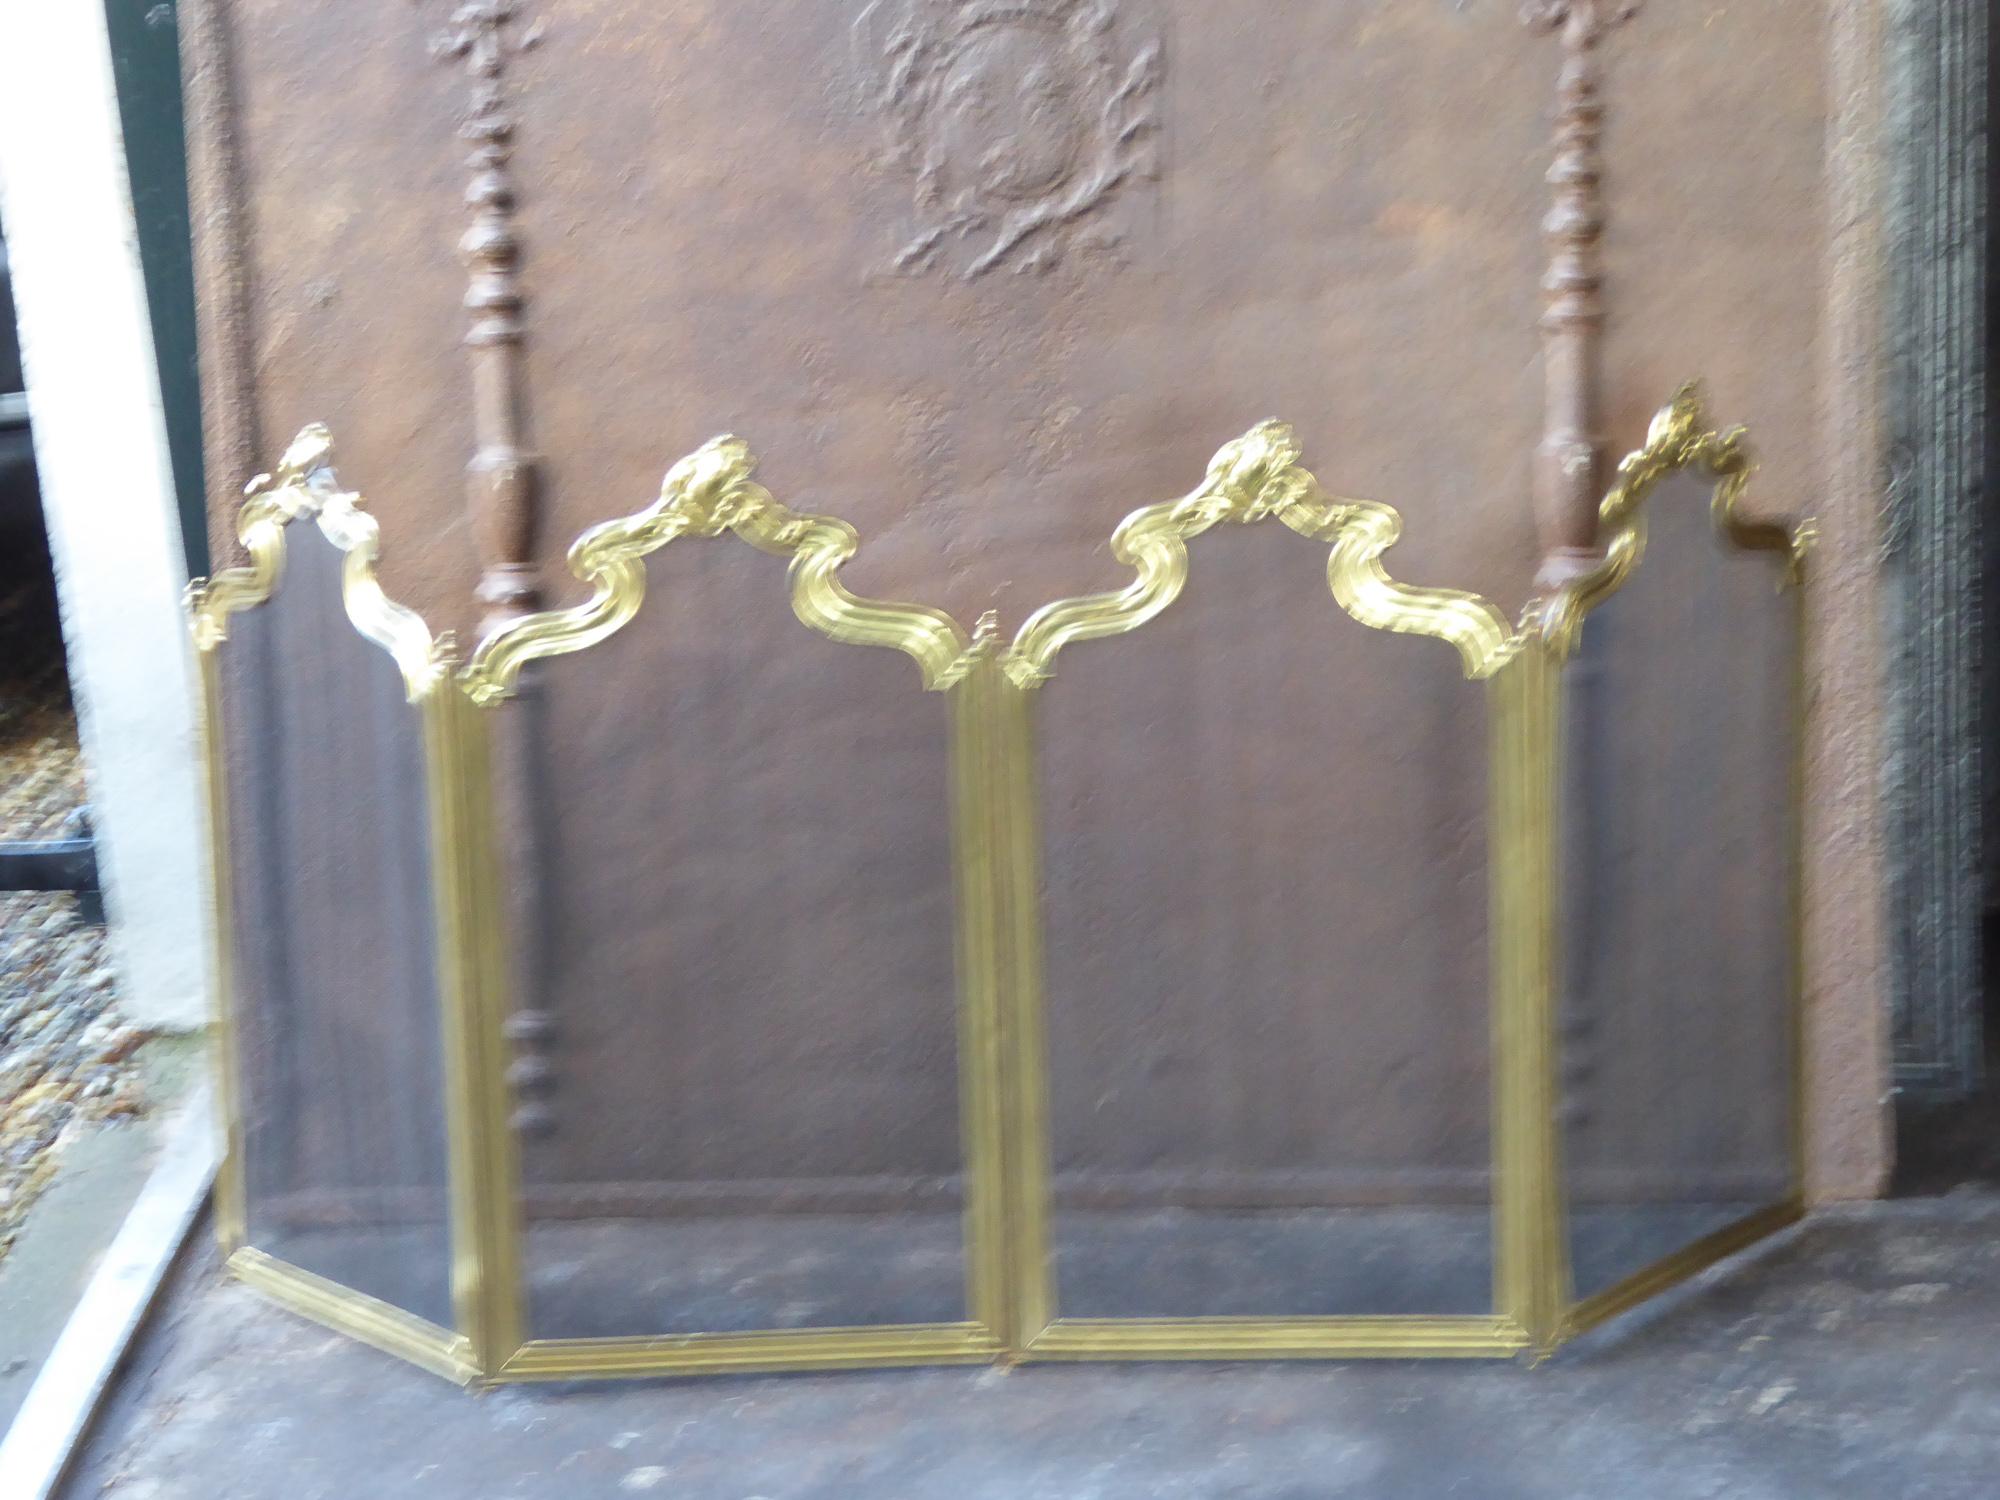 19th-20th century French Napoleon III four panel fireplace screen. The screen is made of brass and iron mesh. 







.